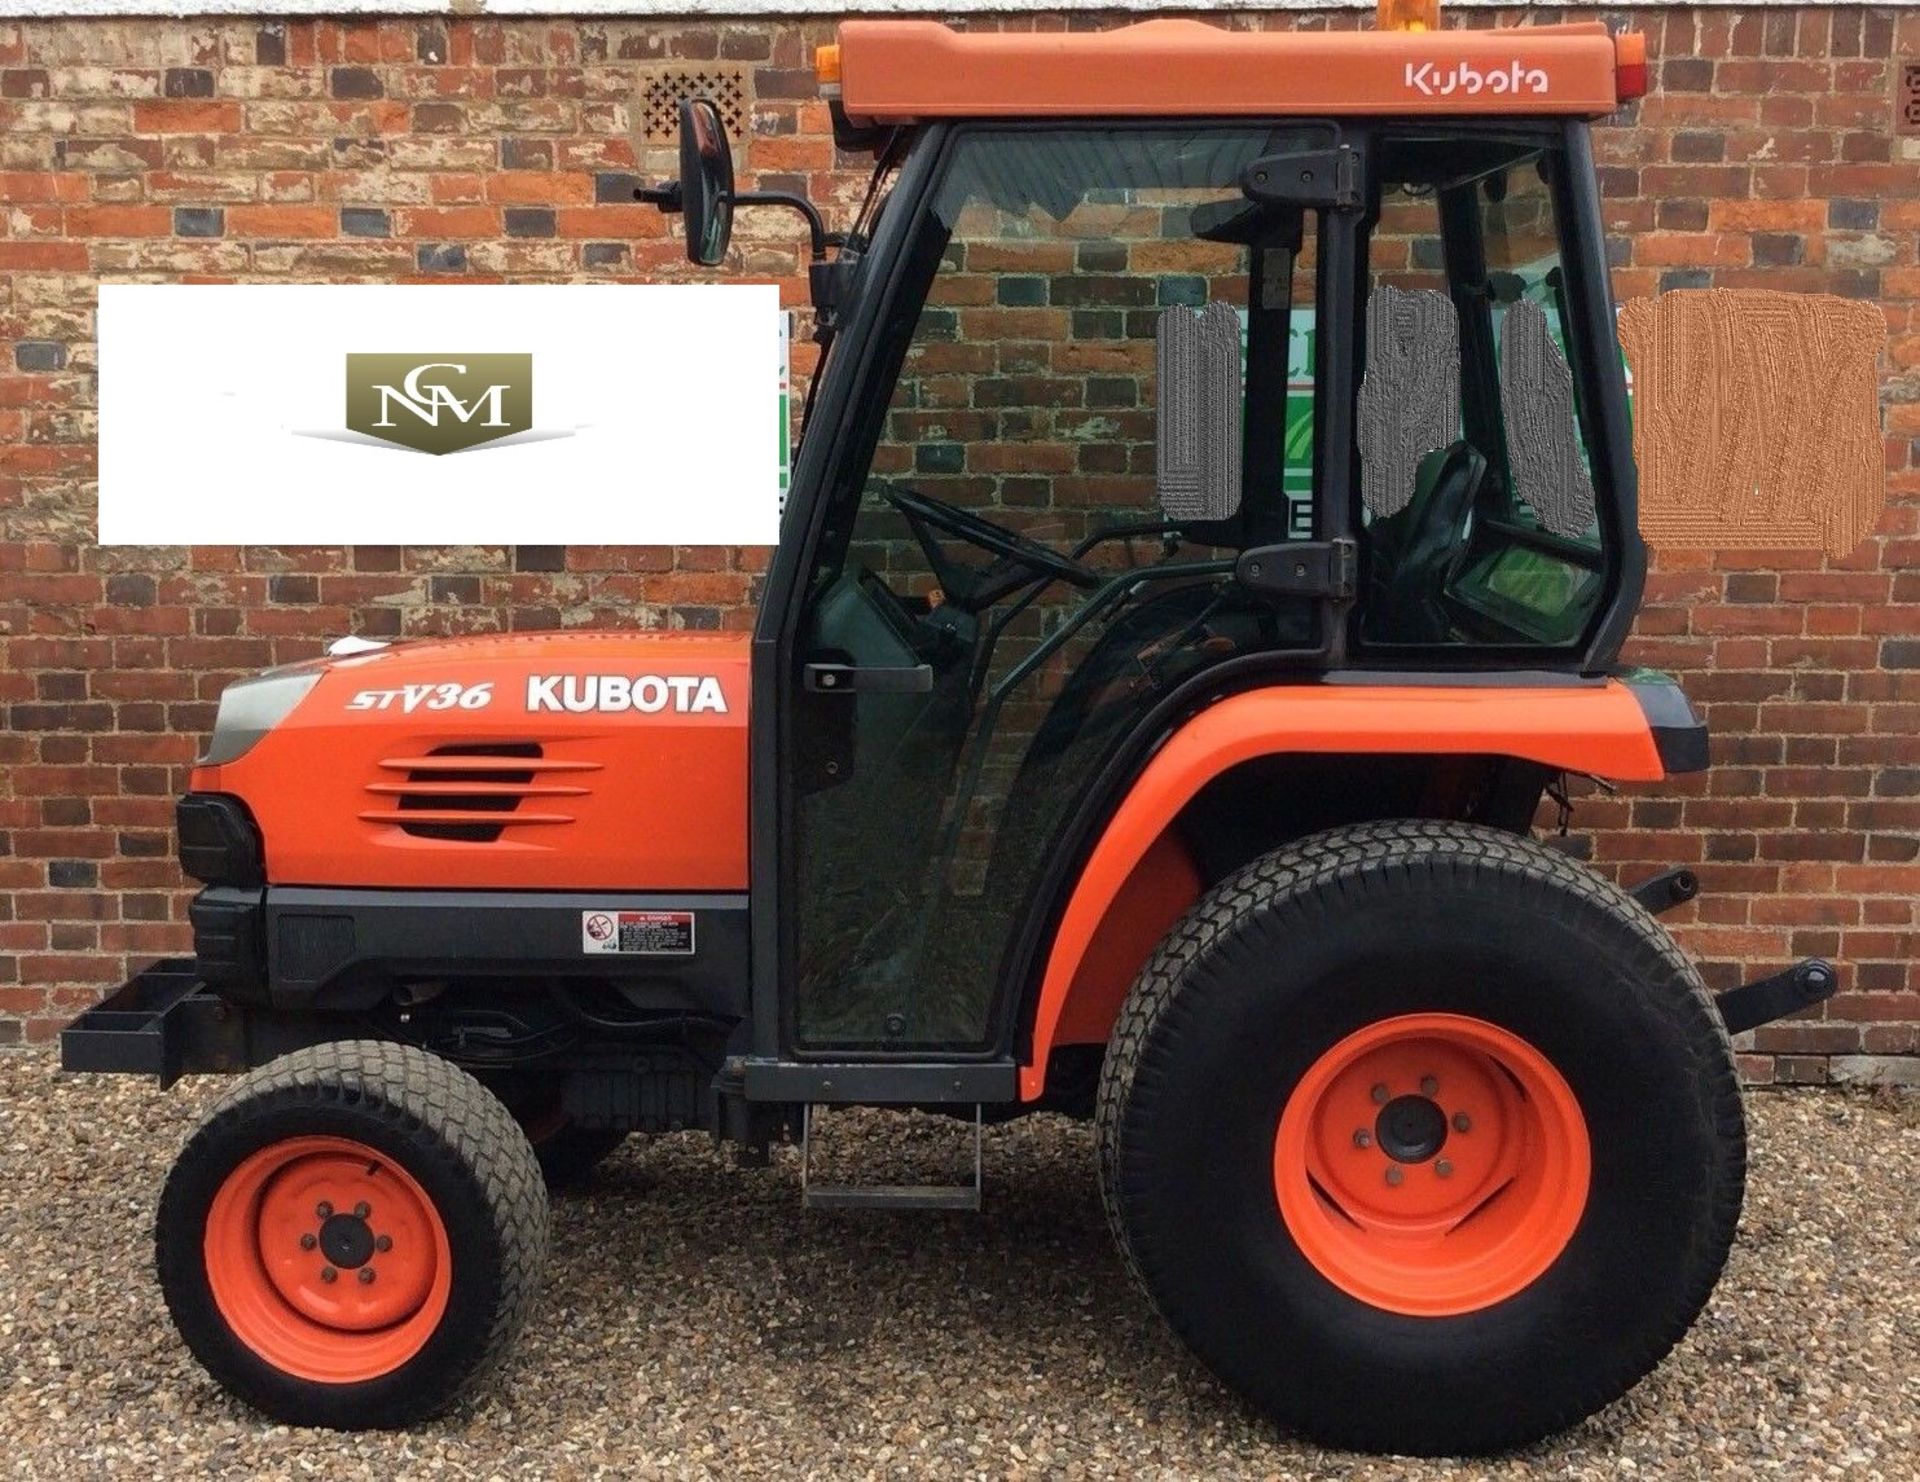 Kubota STV 36 Compact Tractor 4x4 36 Hp Hydrostatic Loader Grass Tyres (441) - Image 3 of 11